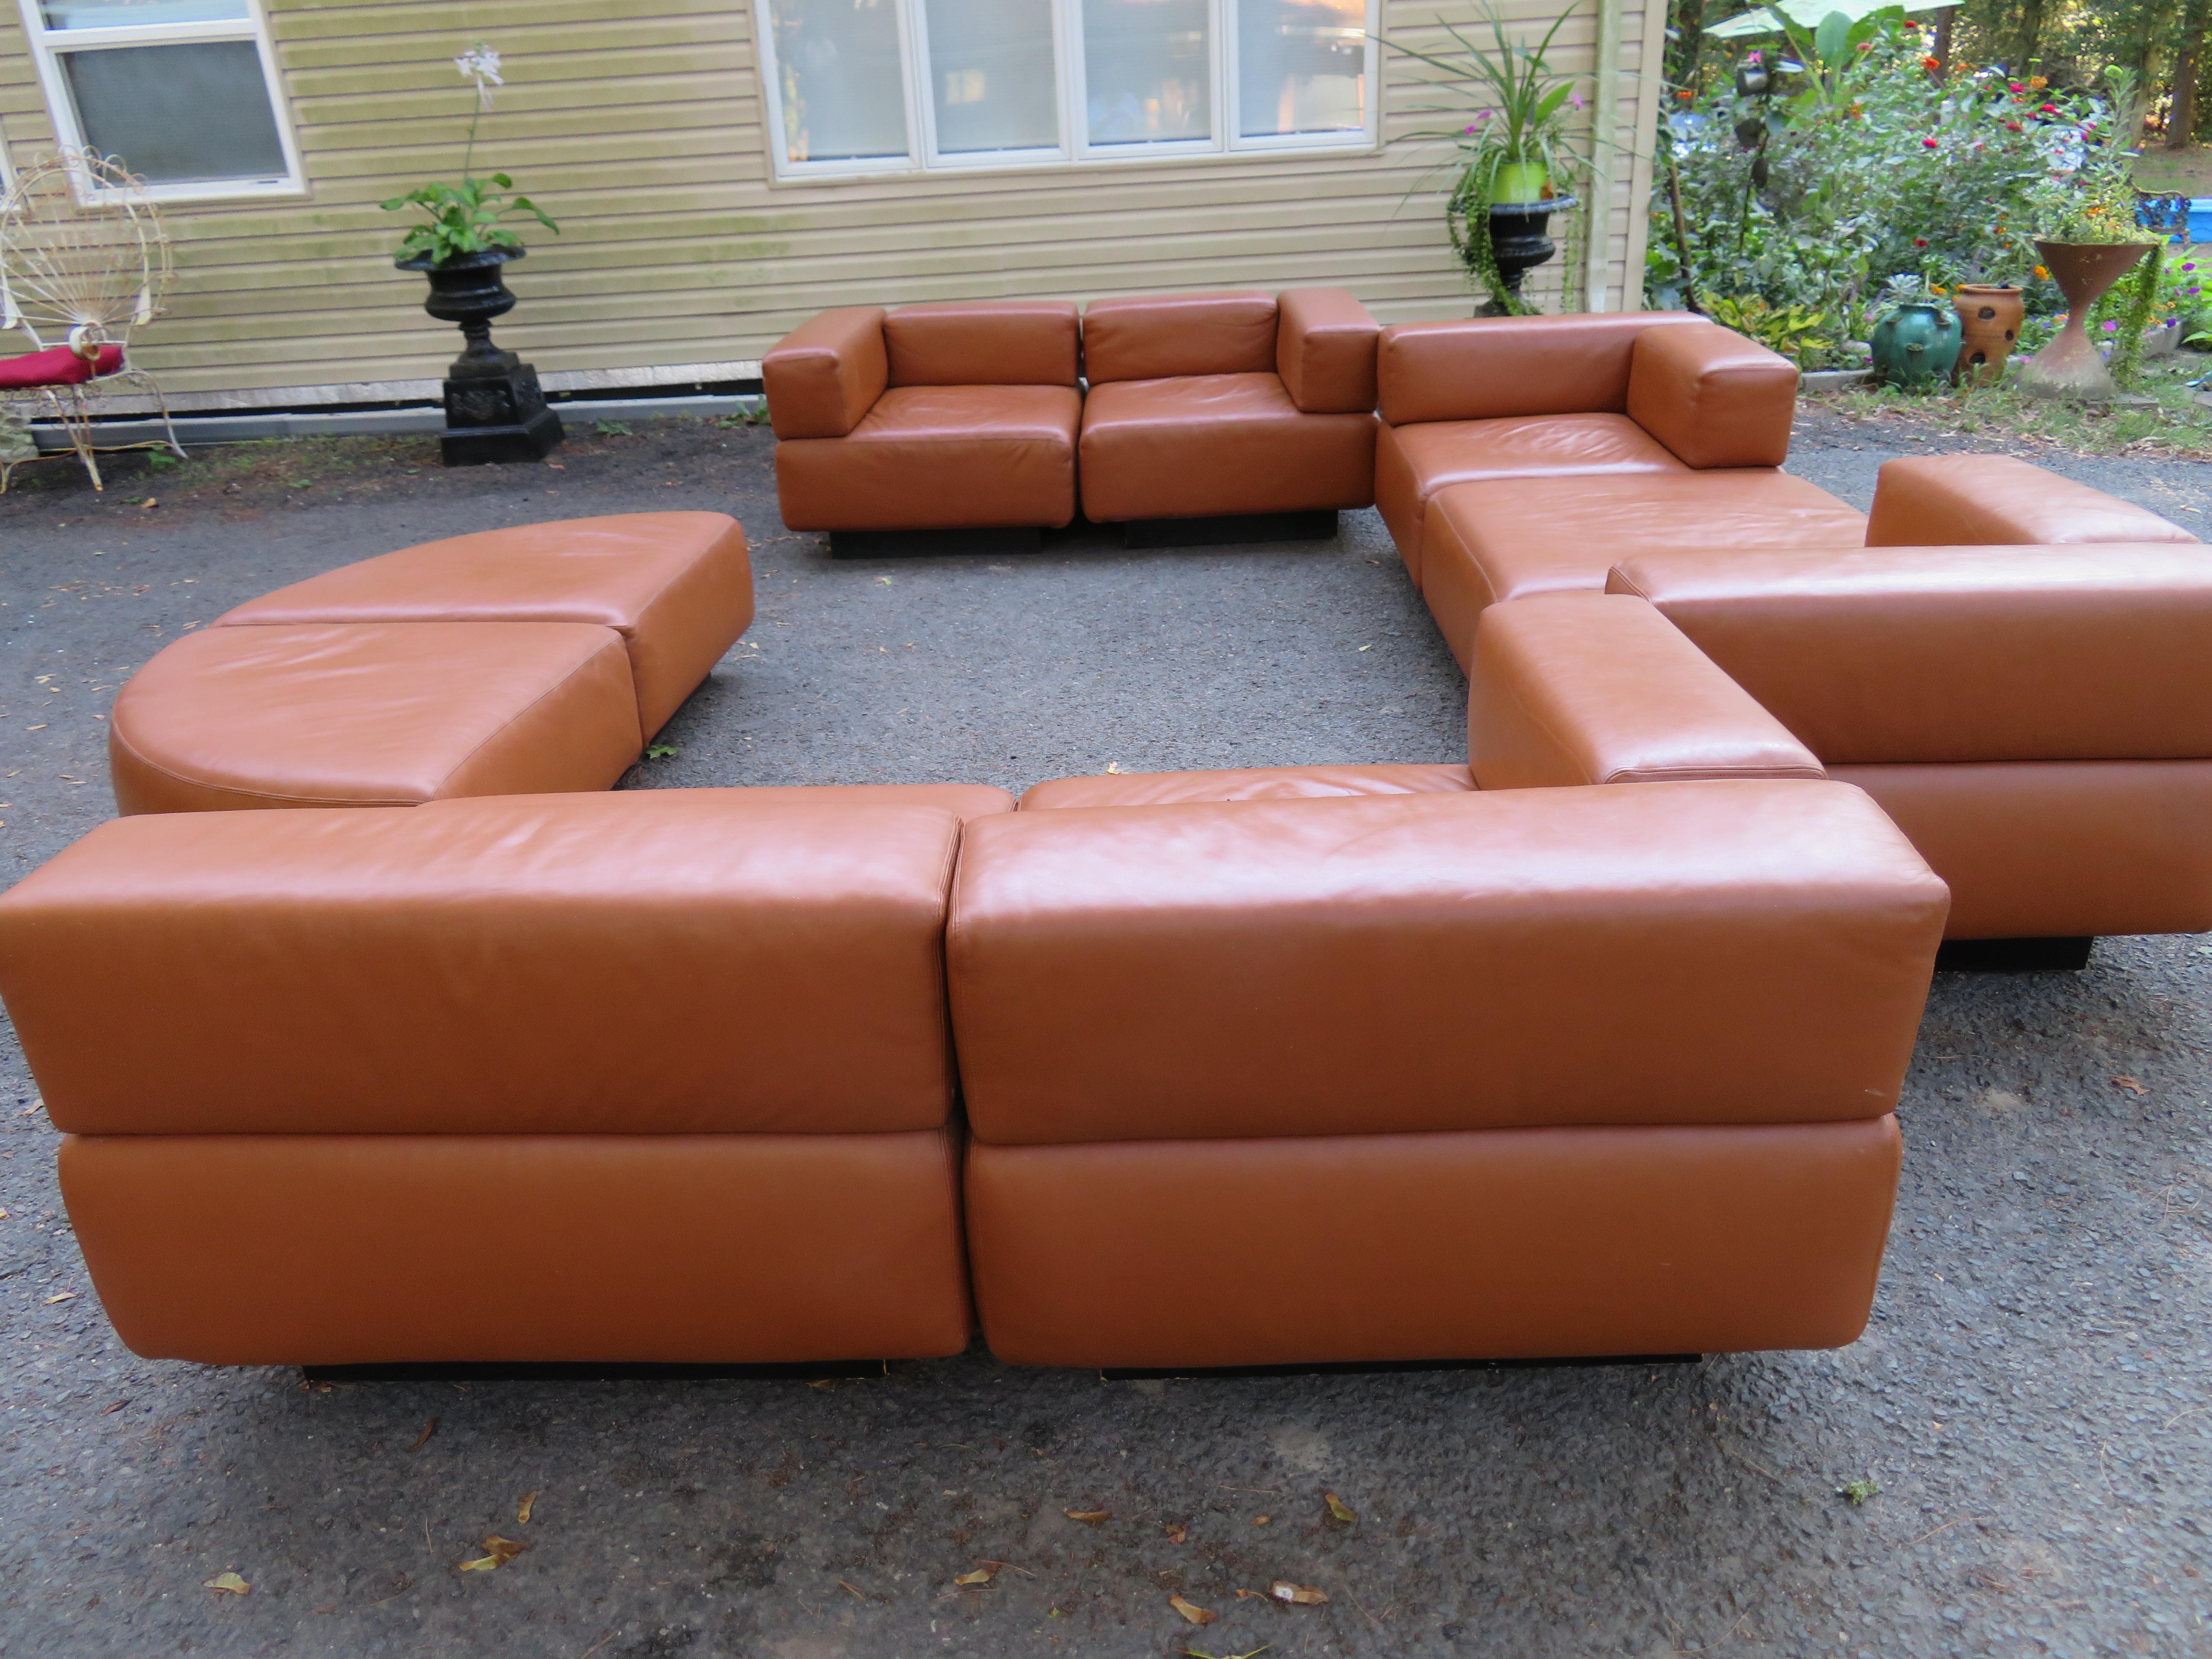 Harvey Probber caramel brown leather 'Cubo' sectional sofa nine sections of Harvey Probber designed 'CUBO' modular seating. Set includes six seating units and three ottomans. The sectional is easily positioned into a number of interesting